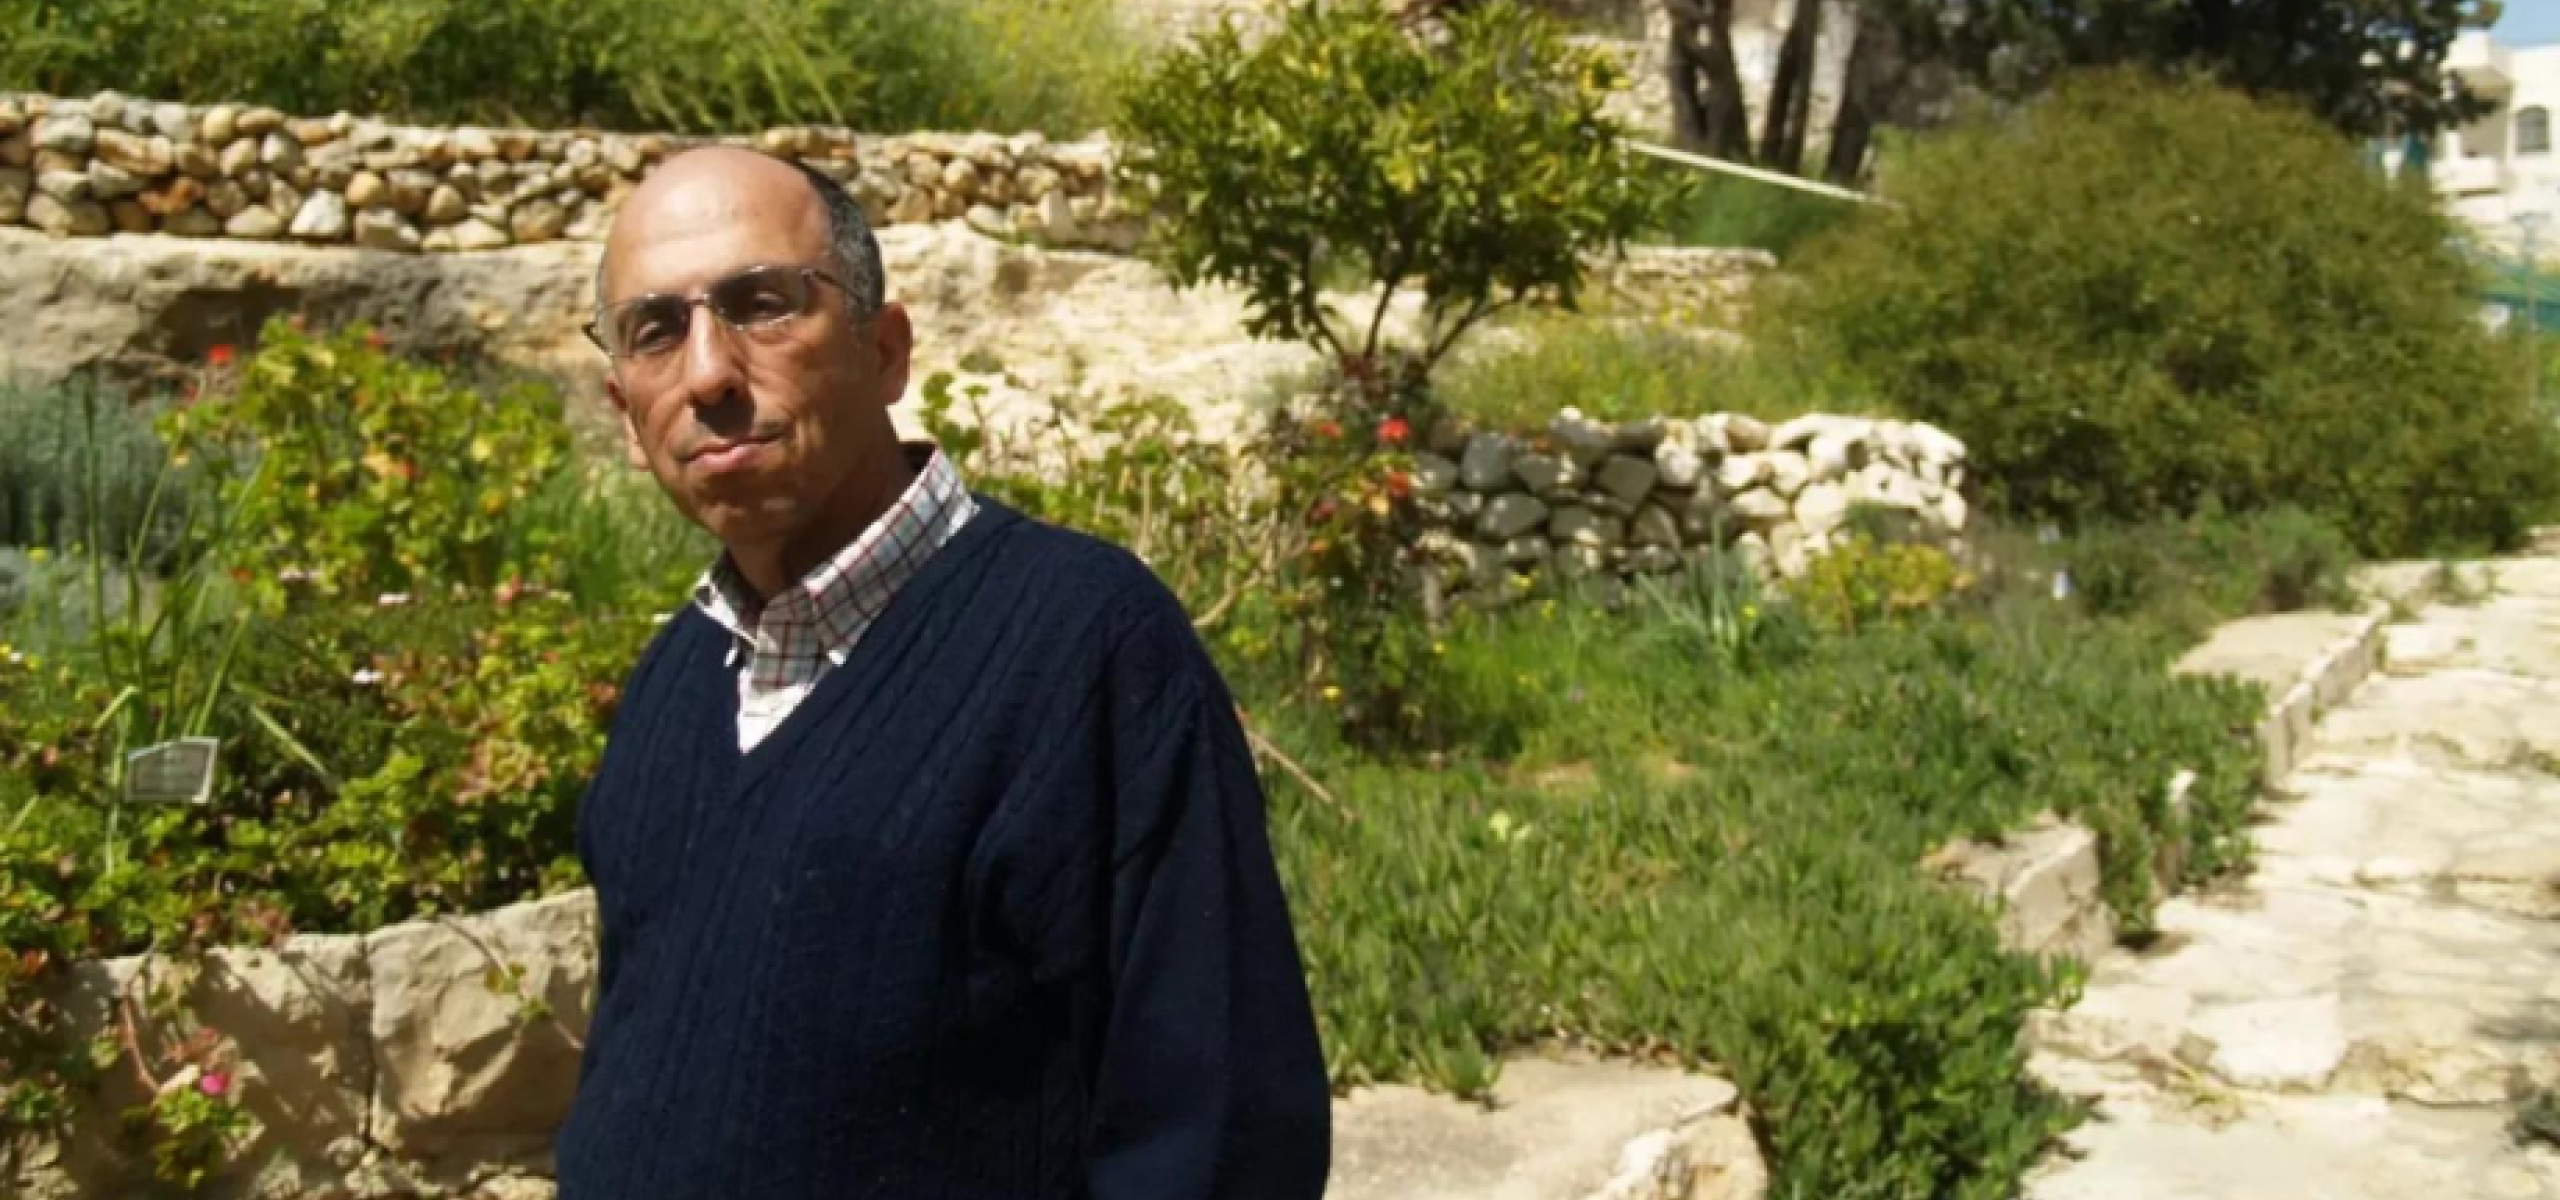 Land Rights, Environmental Justice, and Palestine: In Conversation with Professor Mazin Qumsiyeh